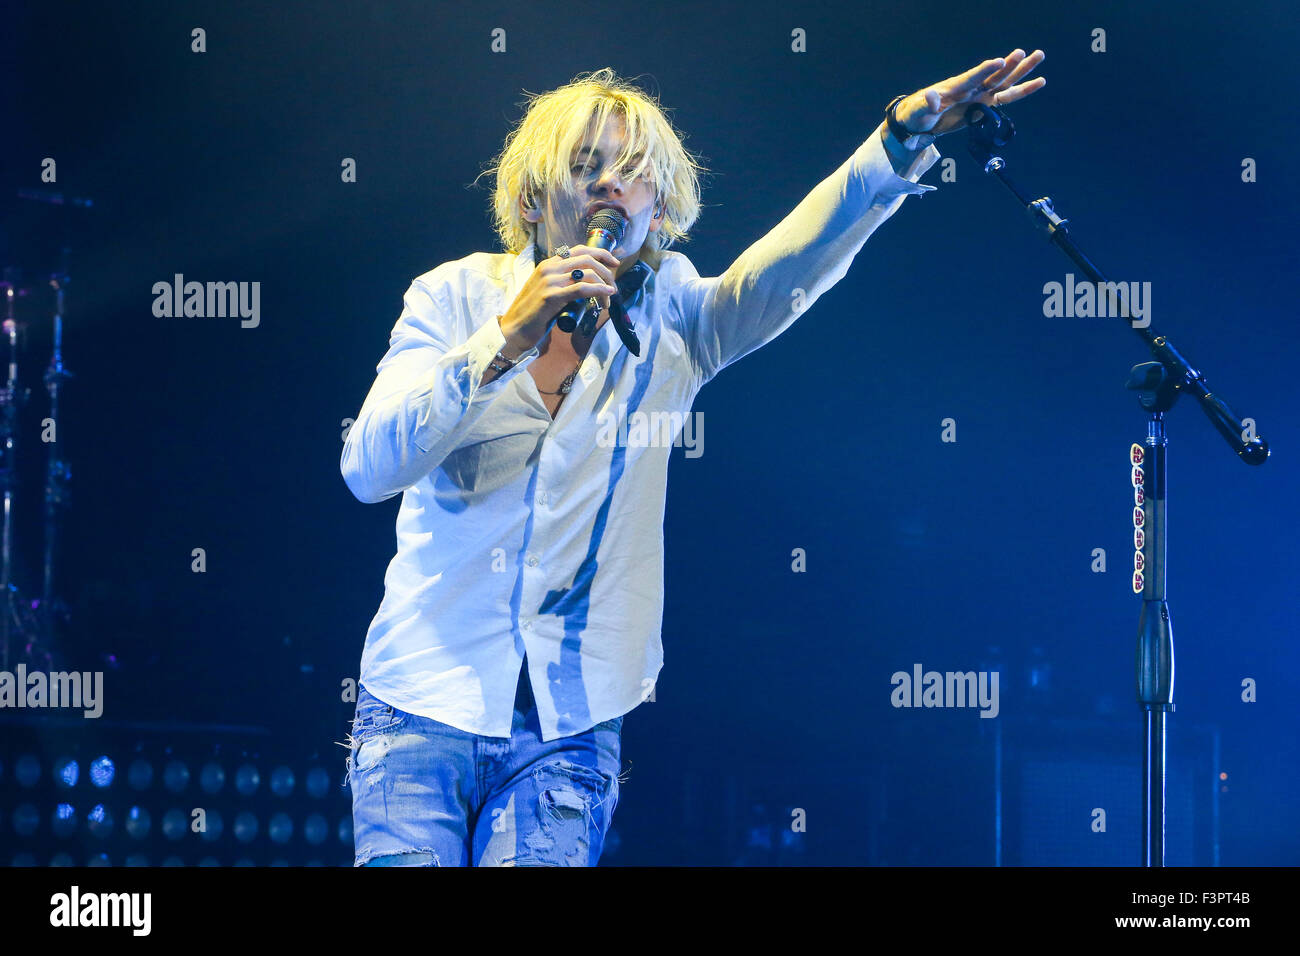 Singer ROSS LYNCH of the band R5 brings their 2015 Summer Tour Stock Photo